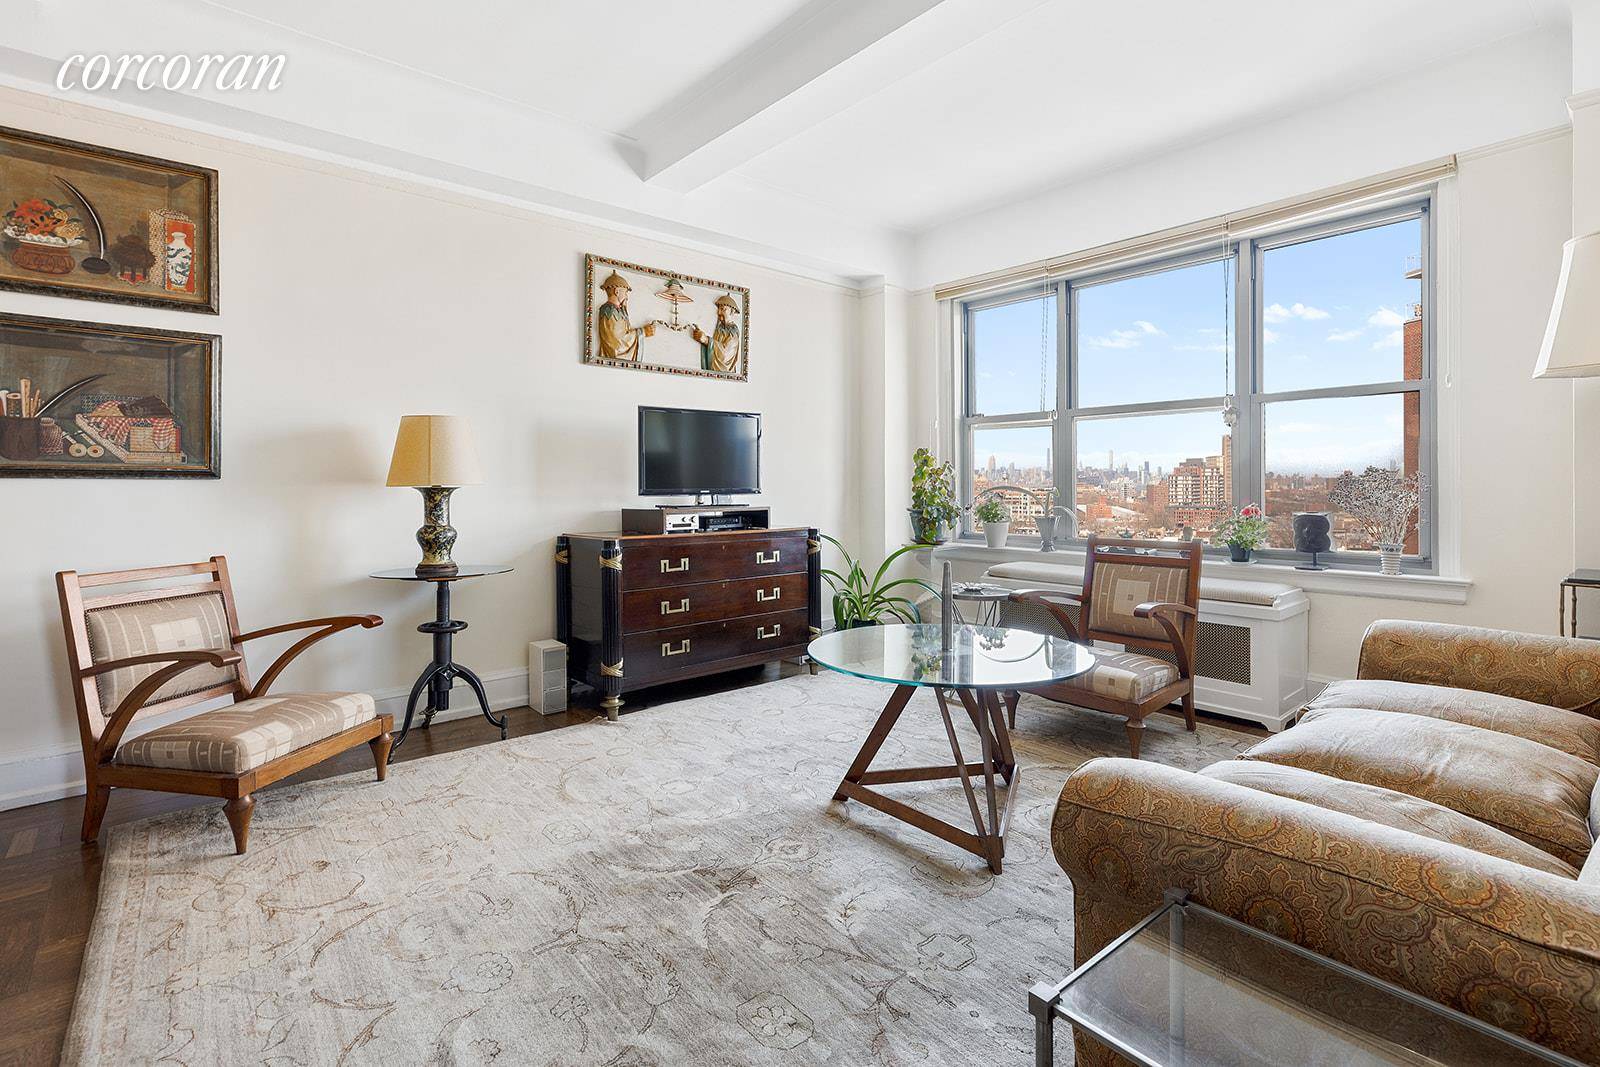 Perched high above Grand Army Plaza with spectacular views north and east, this 10th floor corner apartment is filled with natural light from sunrise to sunset.